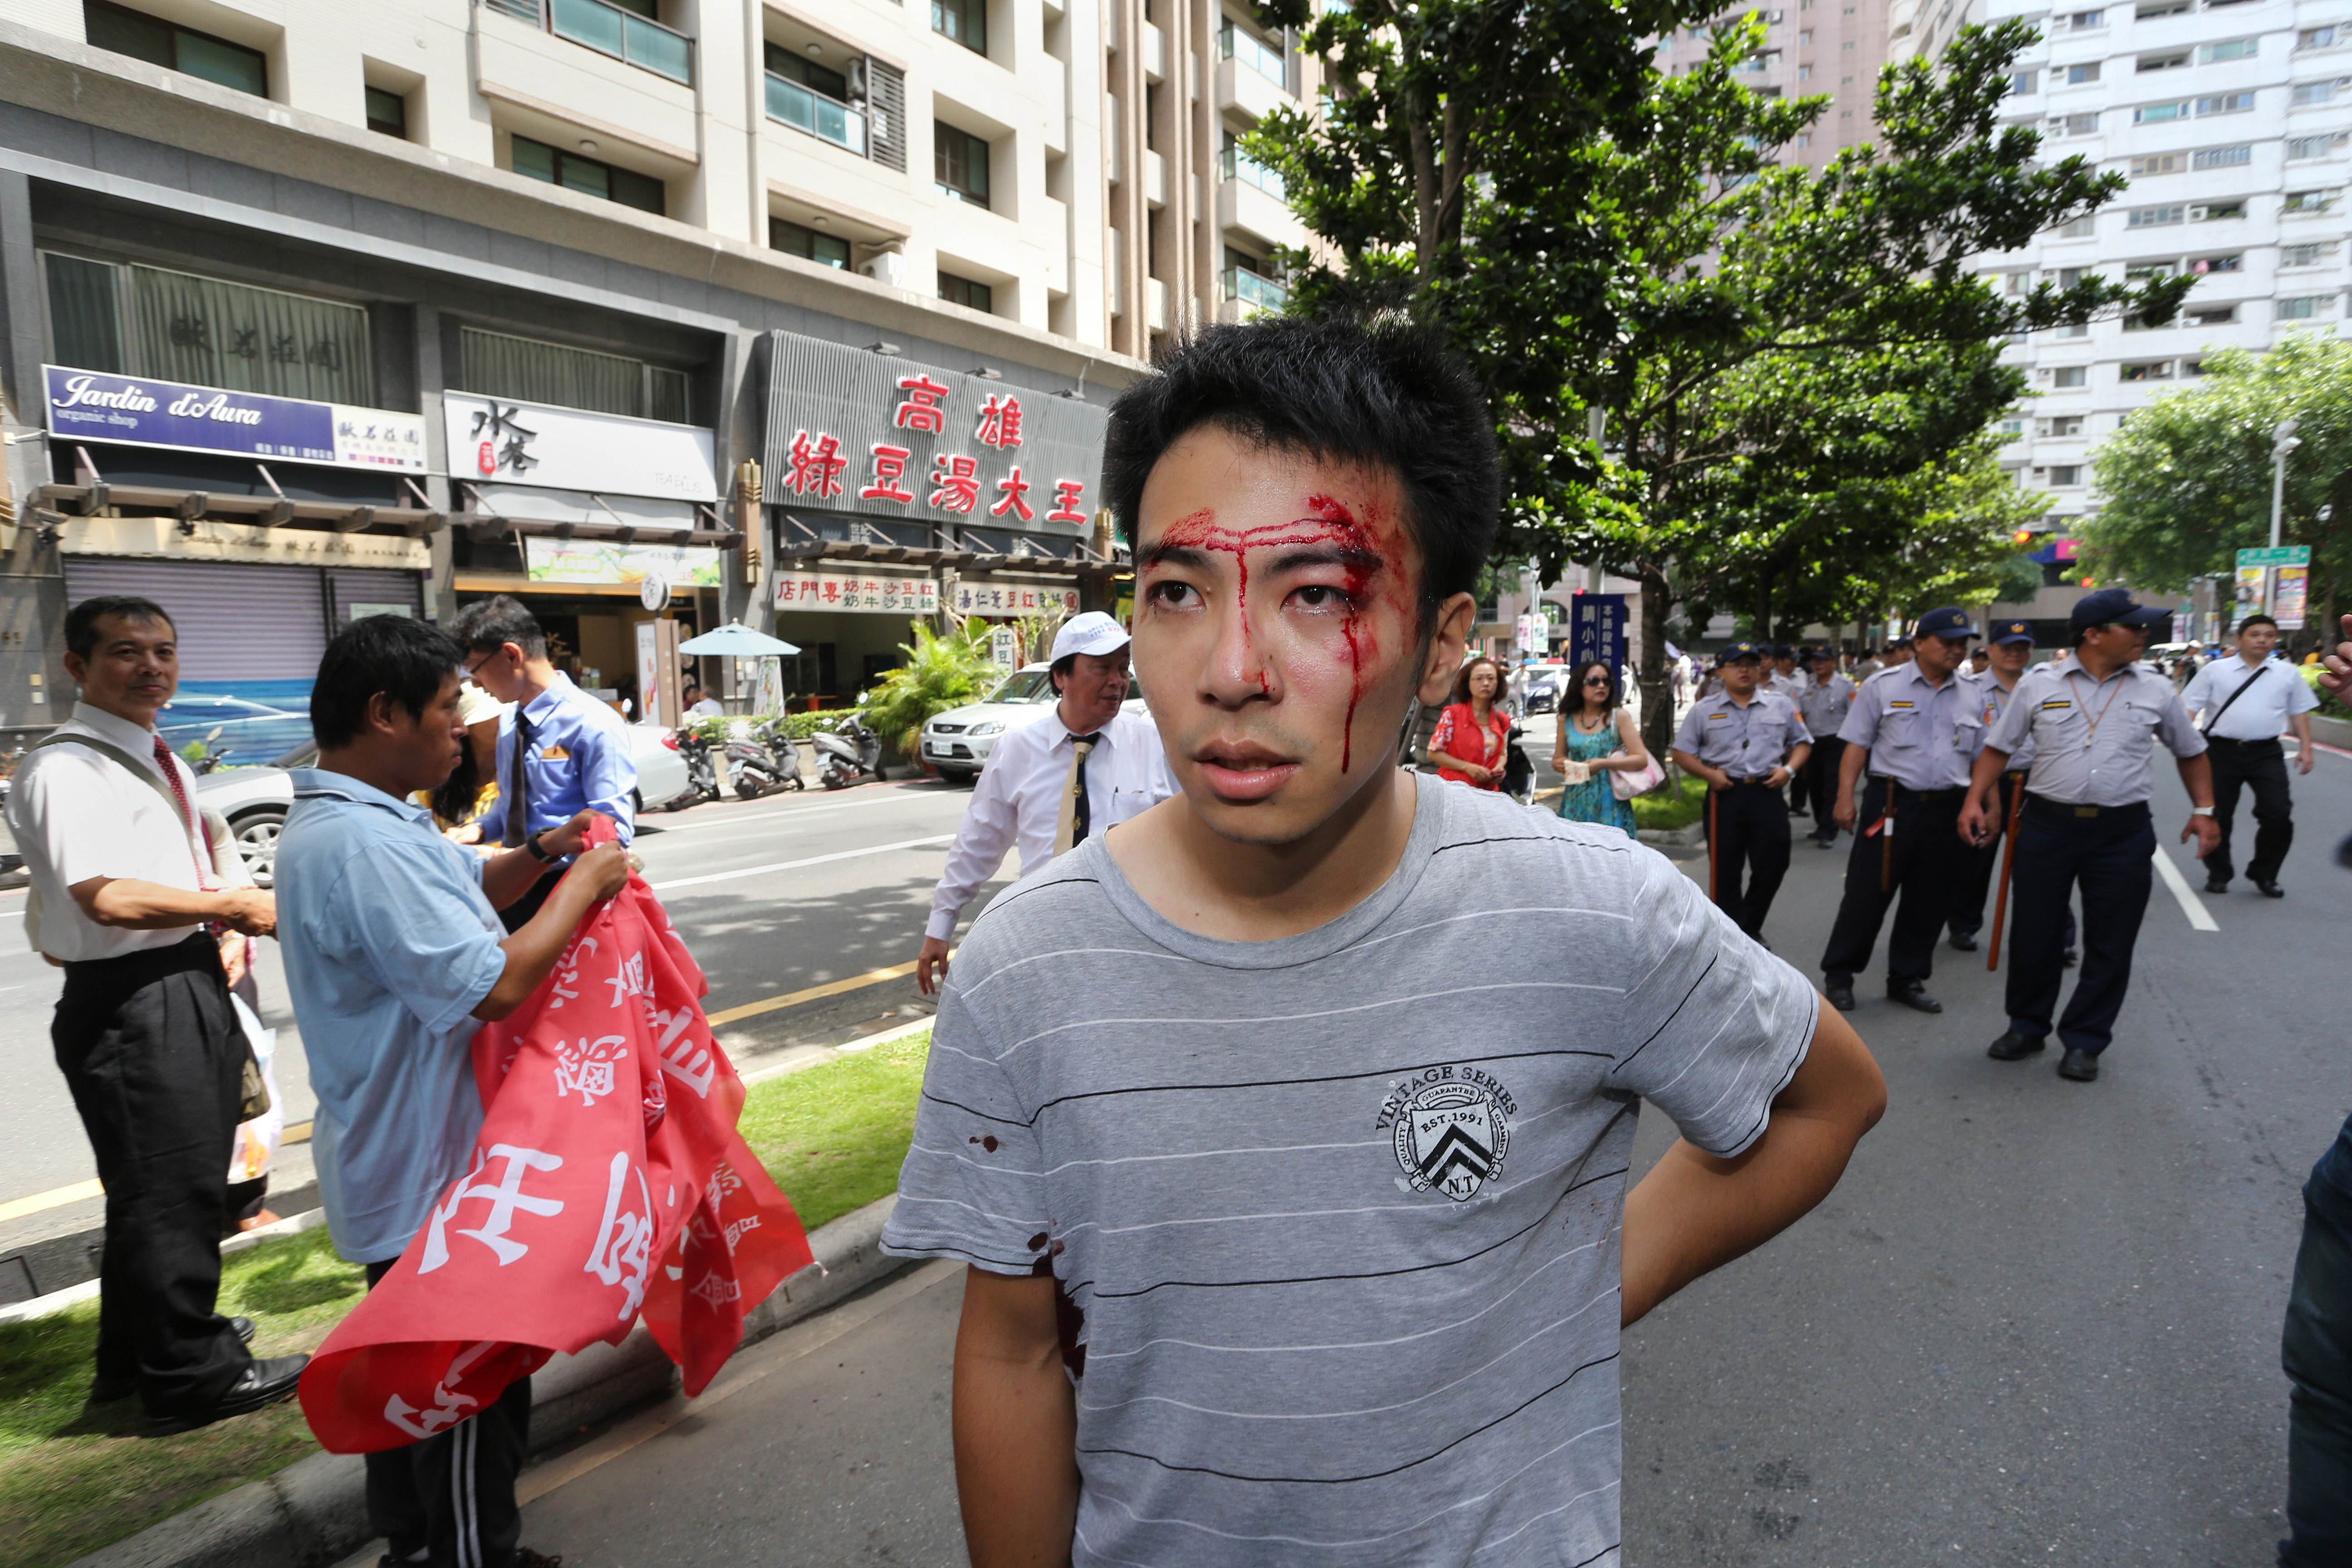 Mainland official Zhang Zhijun shrugs off violent protests during.